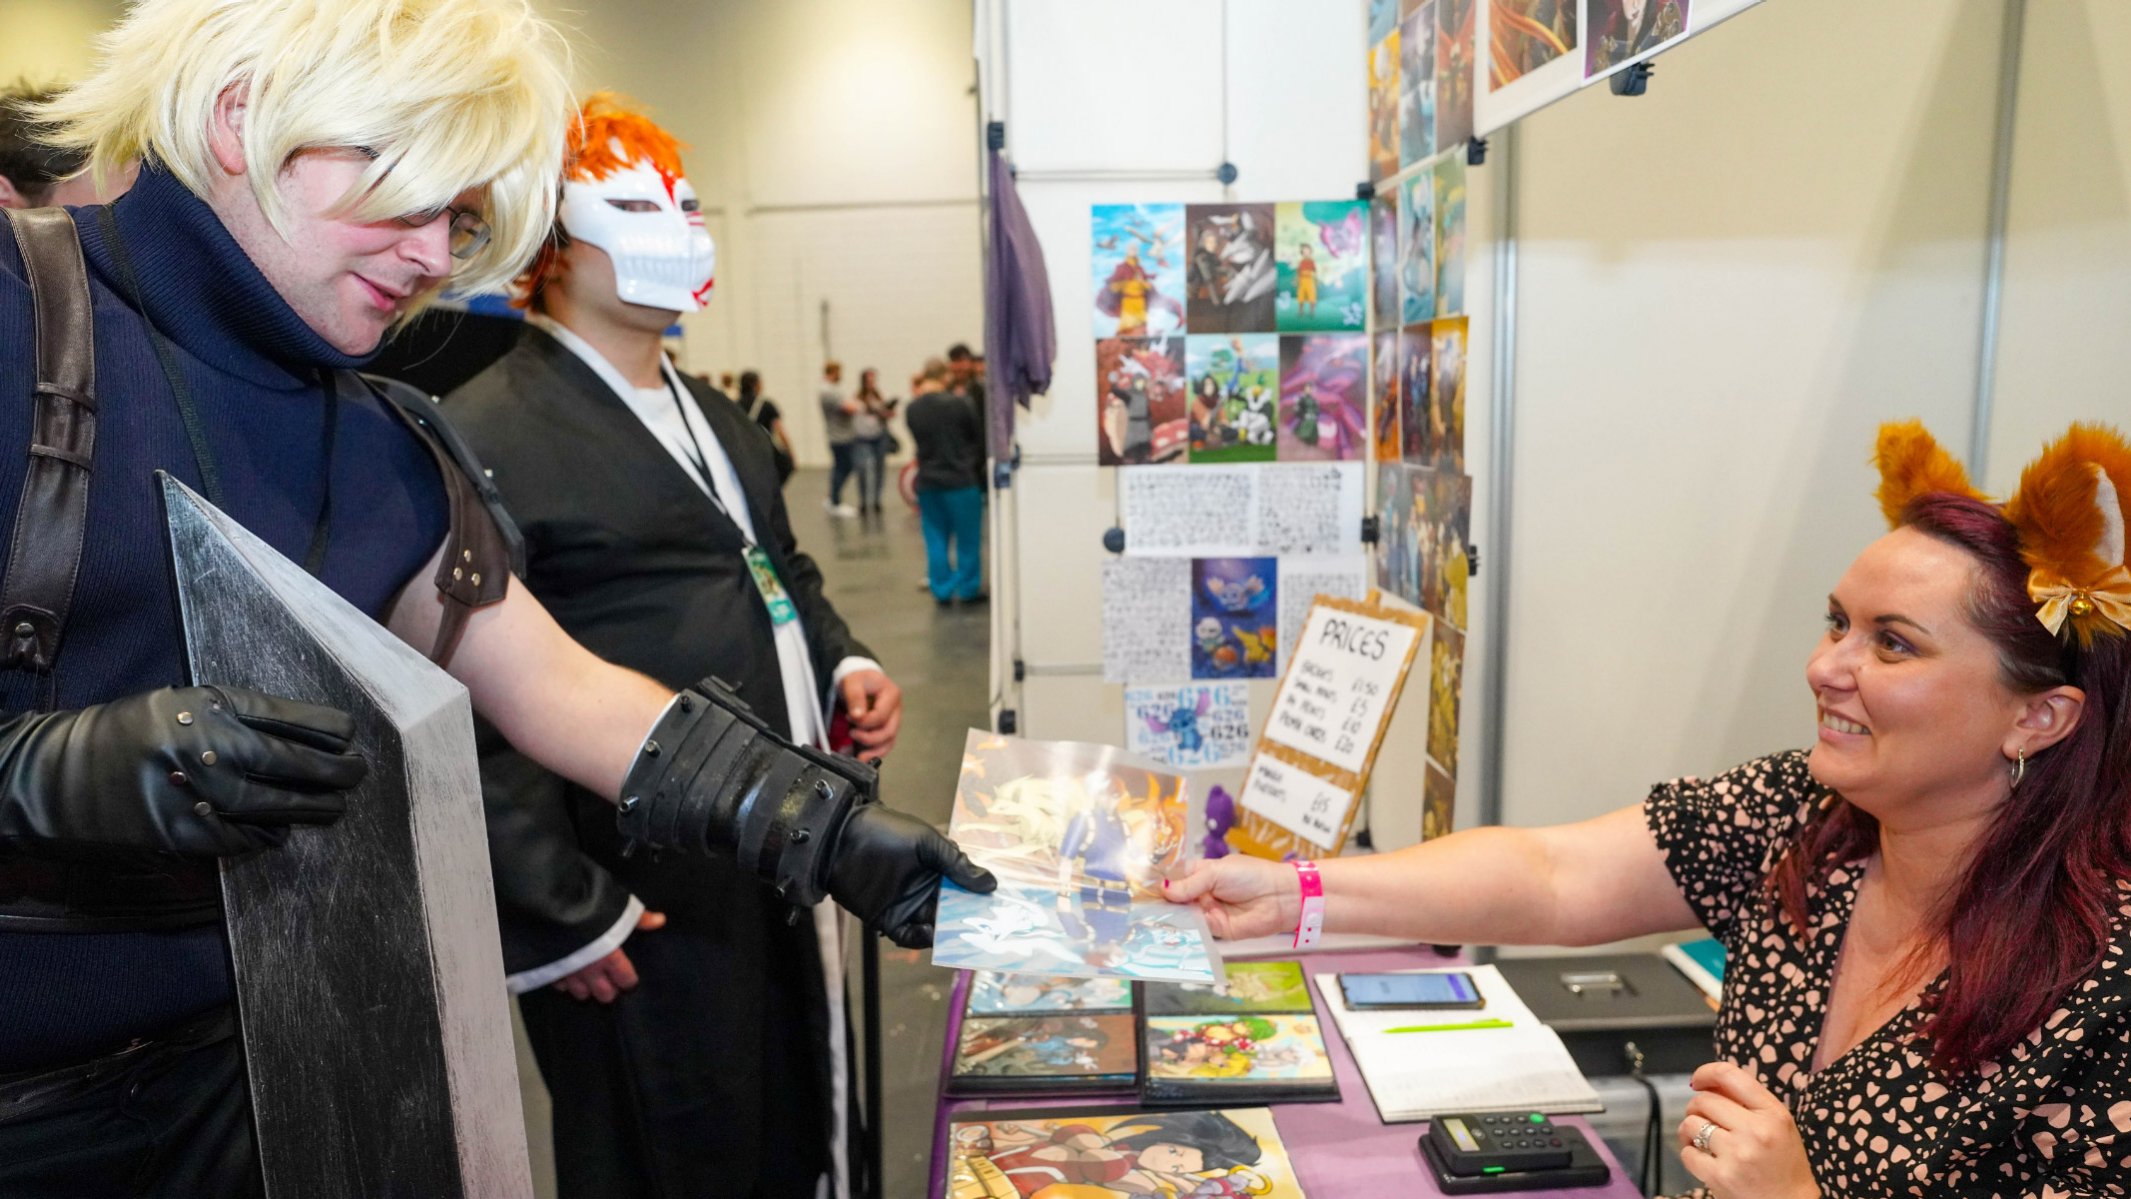 Your Guide To Educational content at MCM